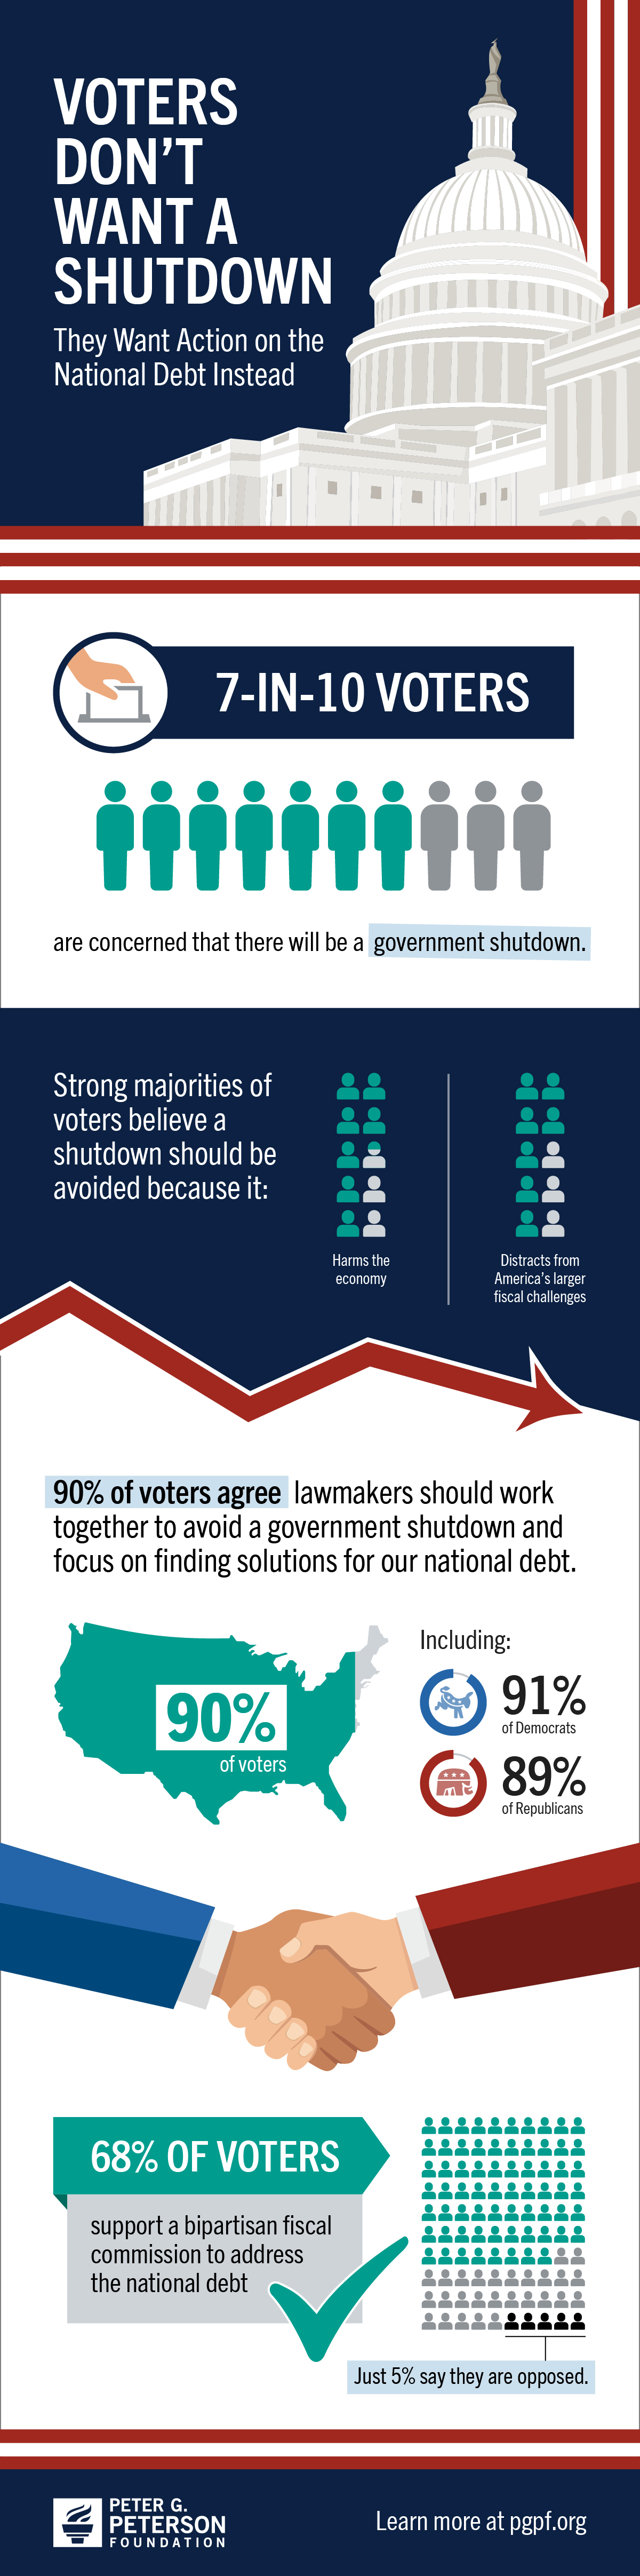 Infographic: Voters Don't Want a Government Shutdown, Want Action on National Debt